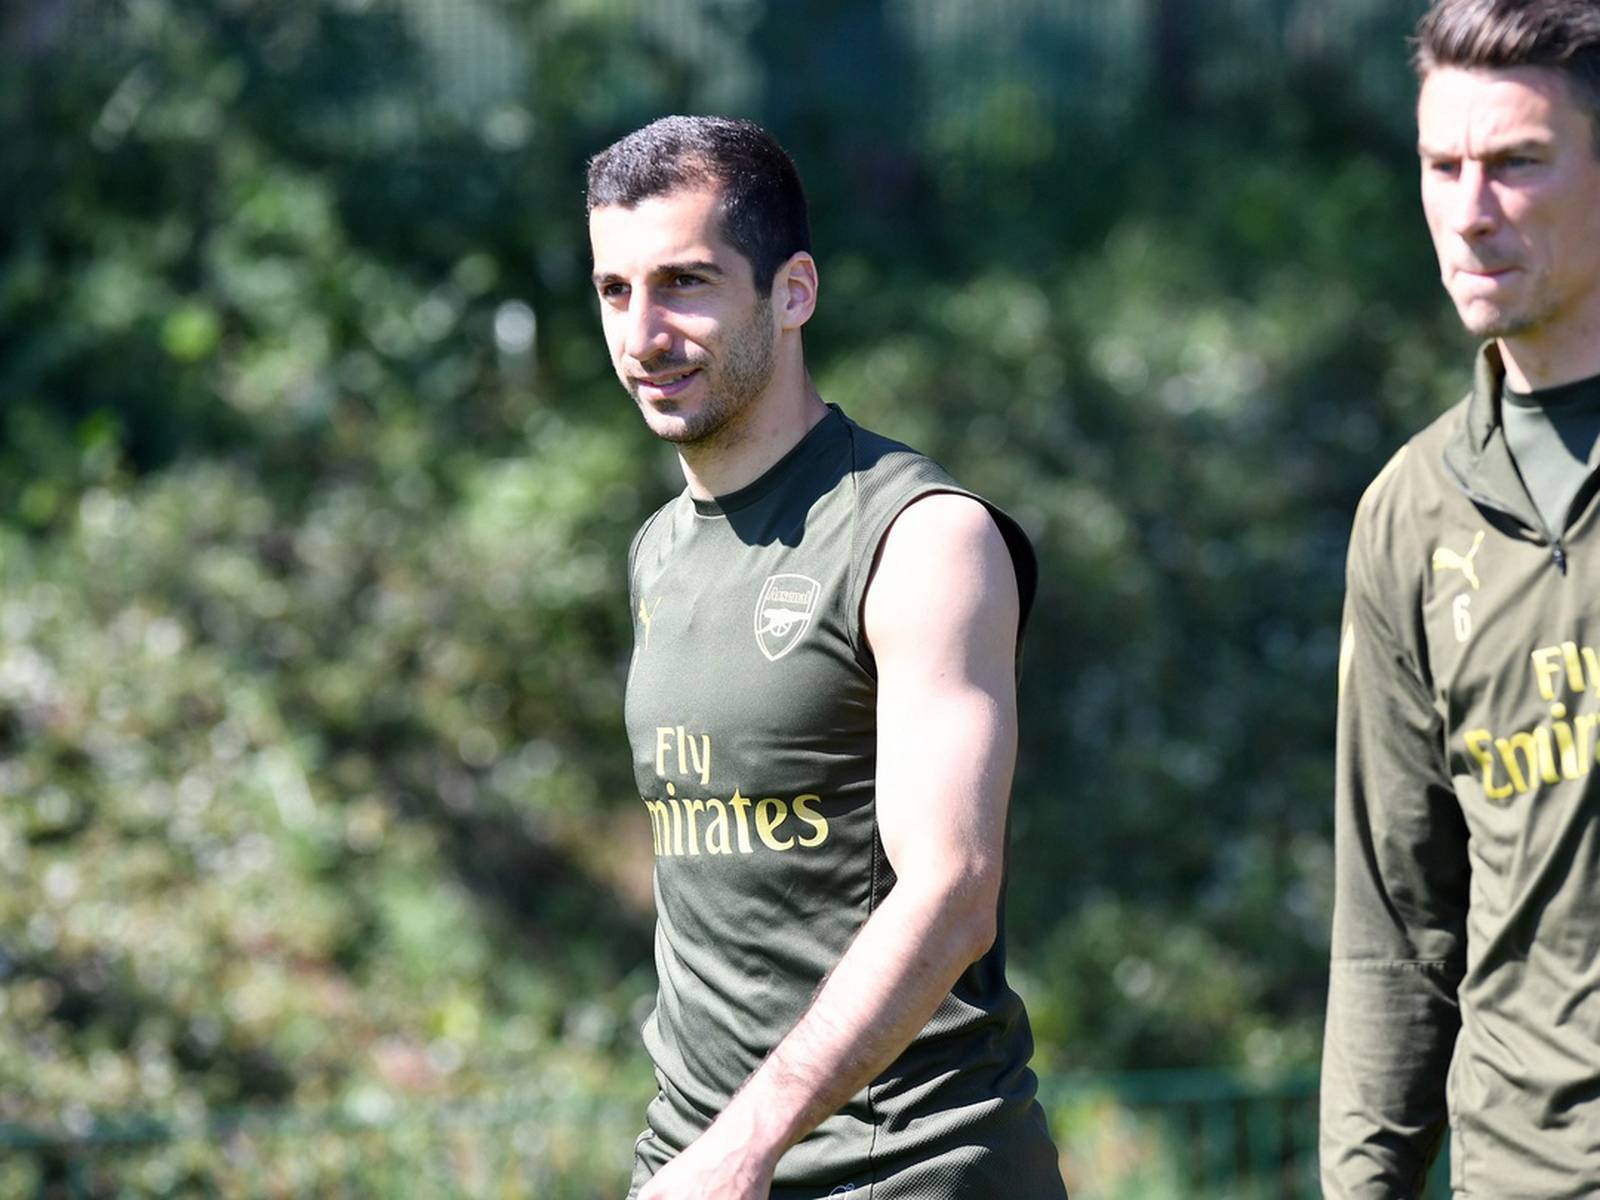 Arsenal dealt further injury blow after Henrikh Mkhitaryan is ruled out for  six weeks with fractured foot